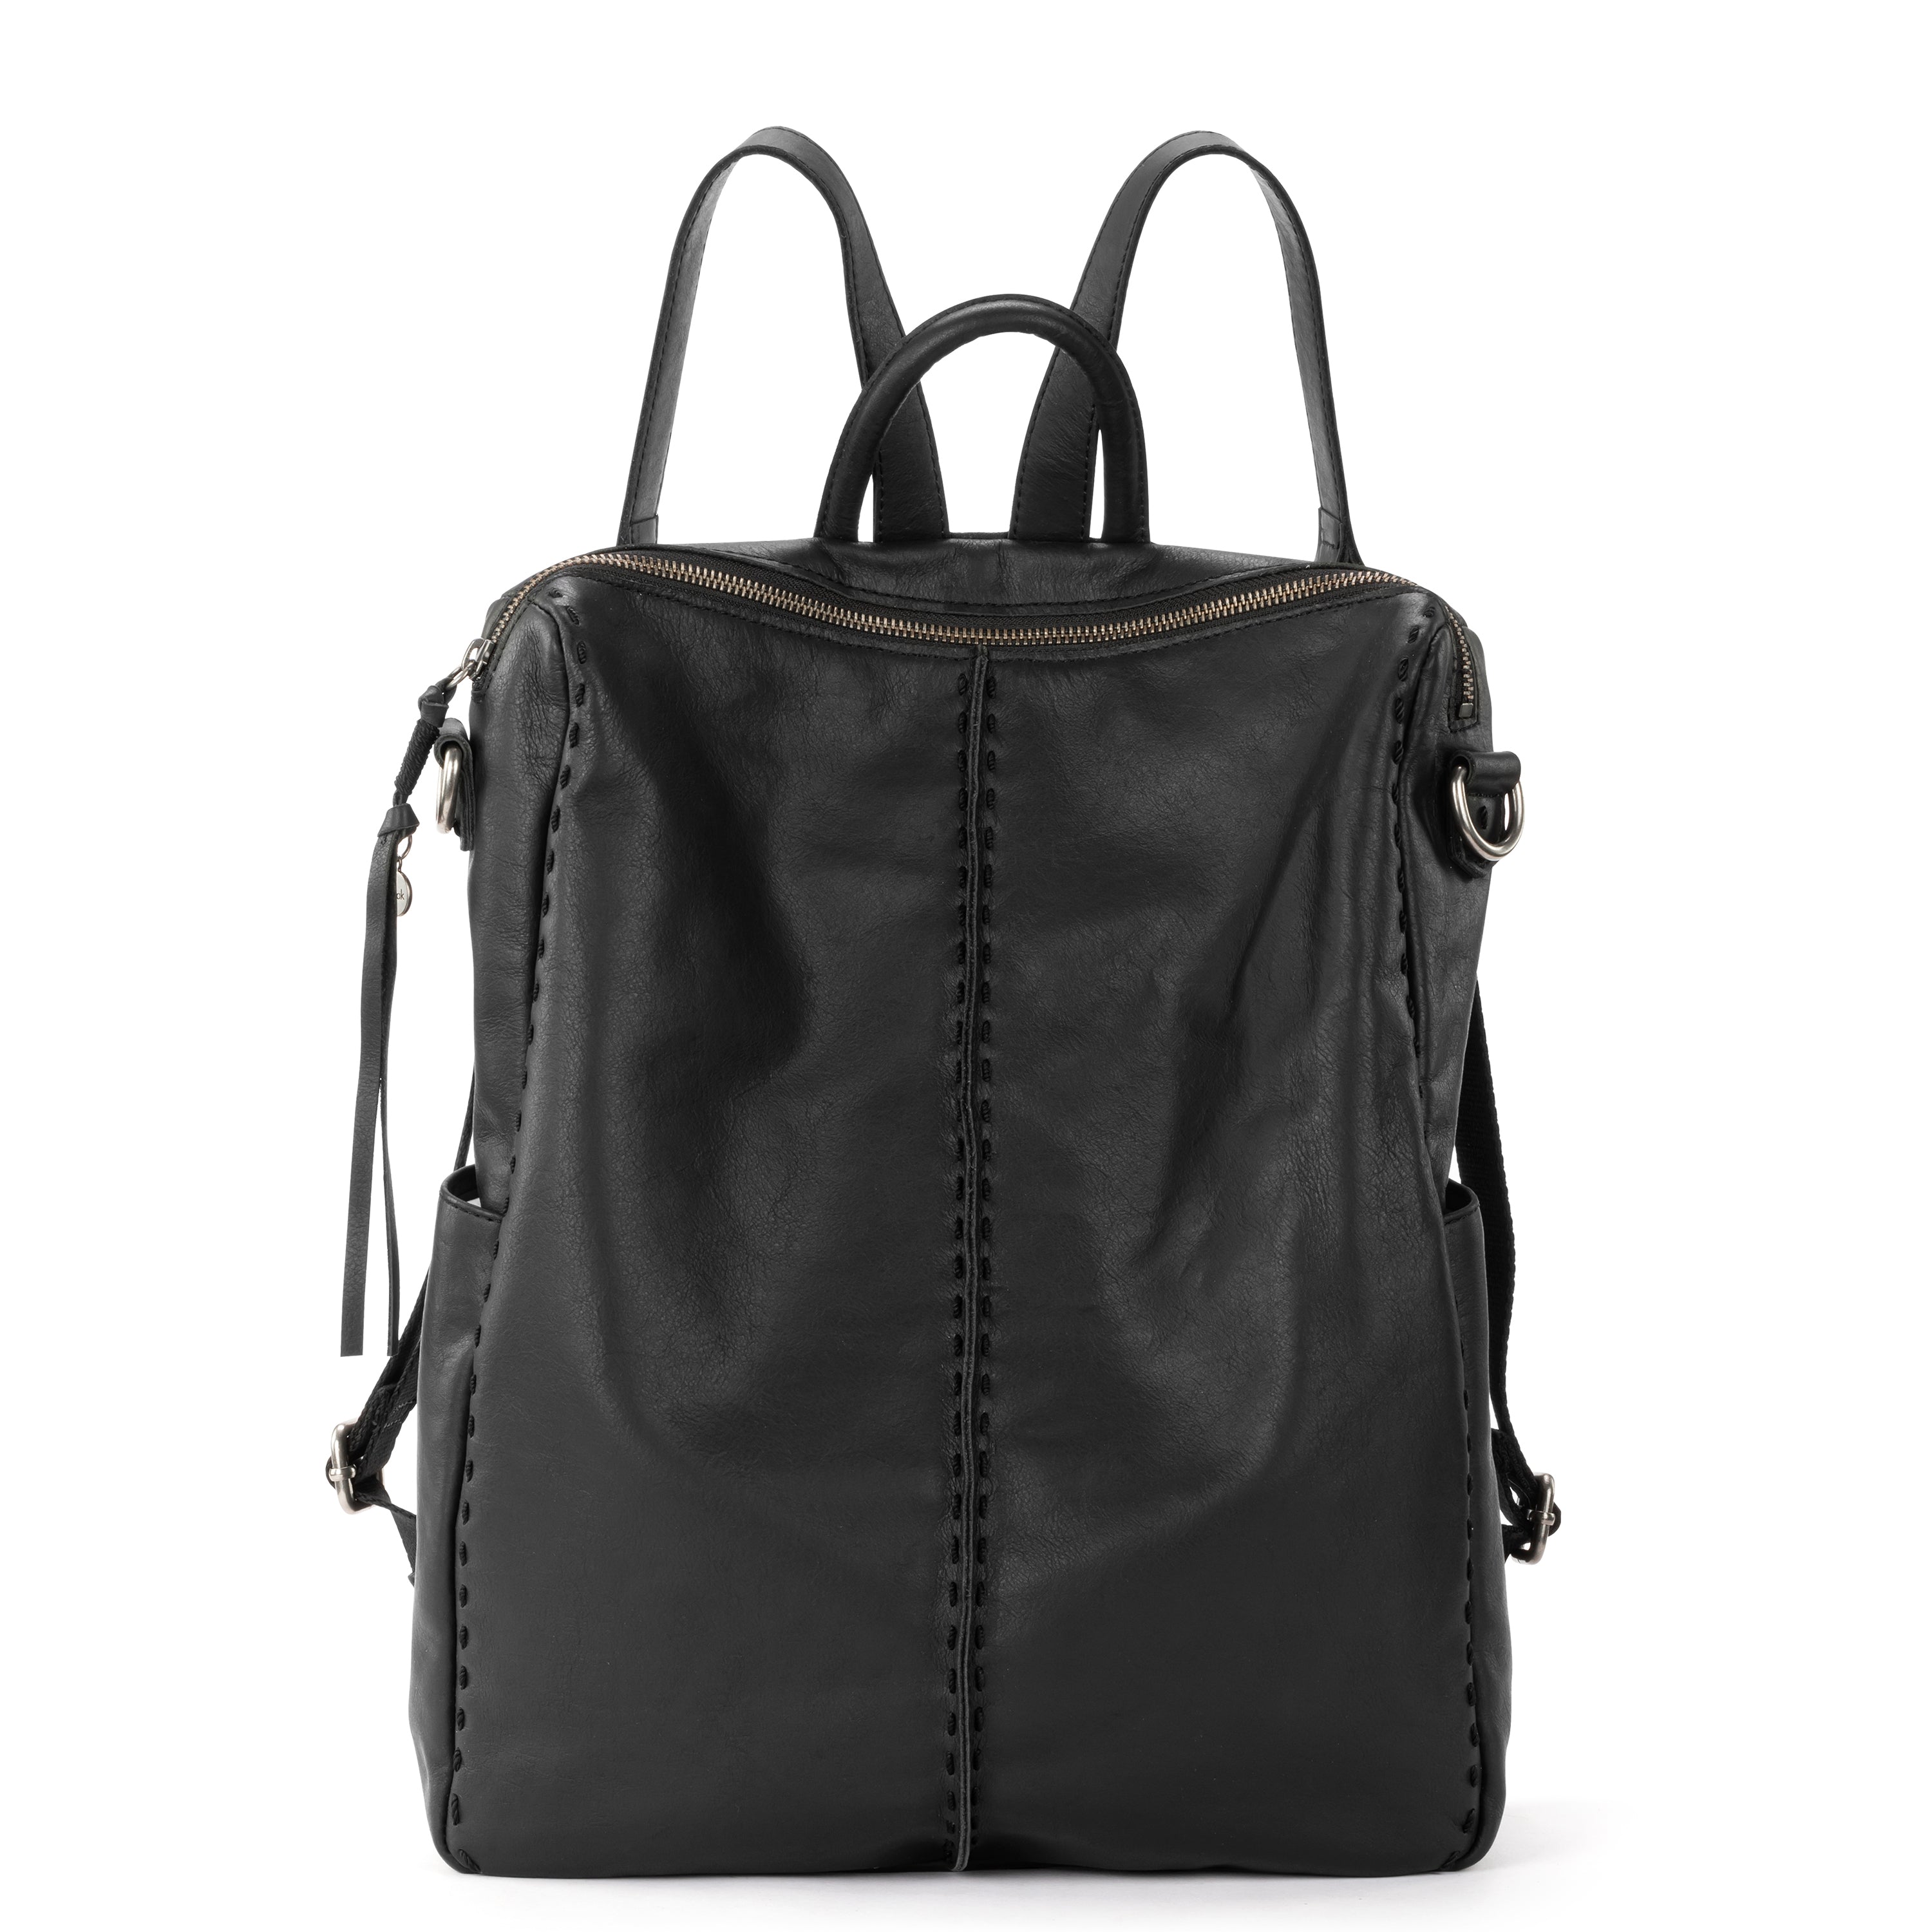 Buy Women's Everyday Leather Backpack for N/A 0.0